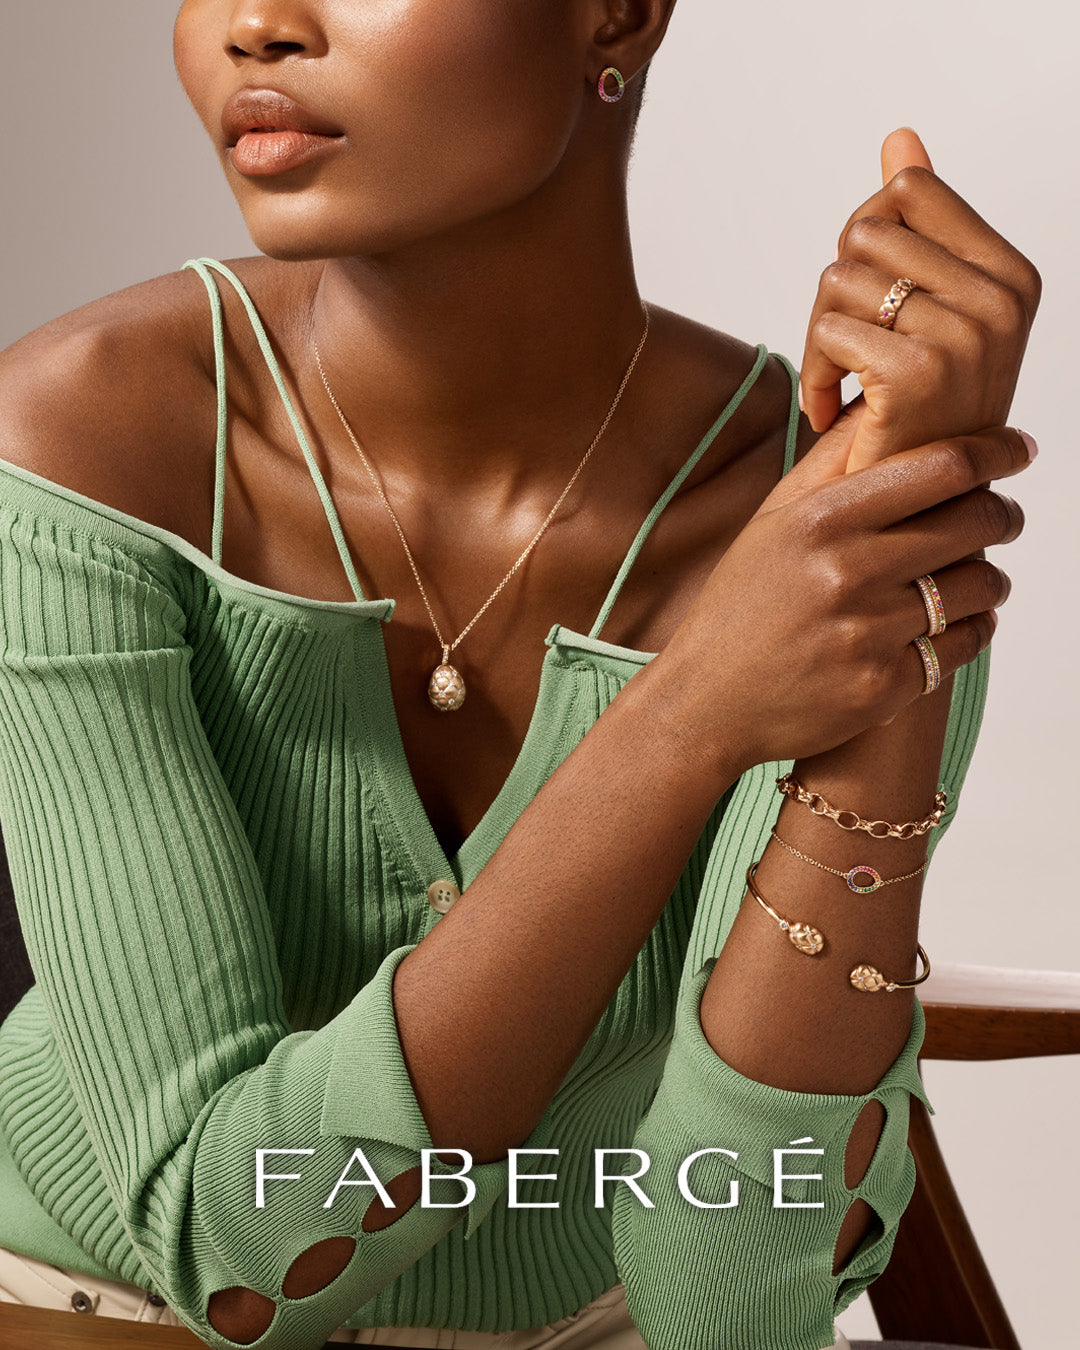 faberge-home-page-banner-mobile